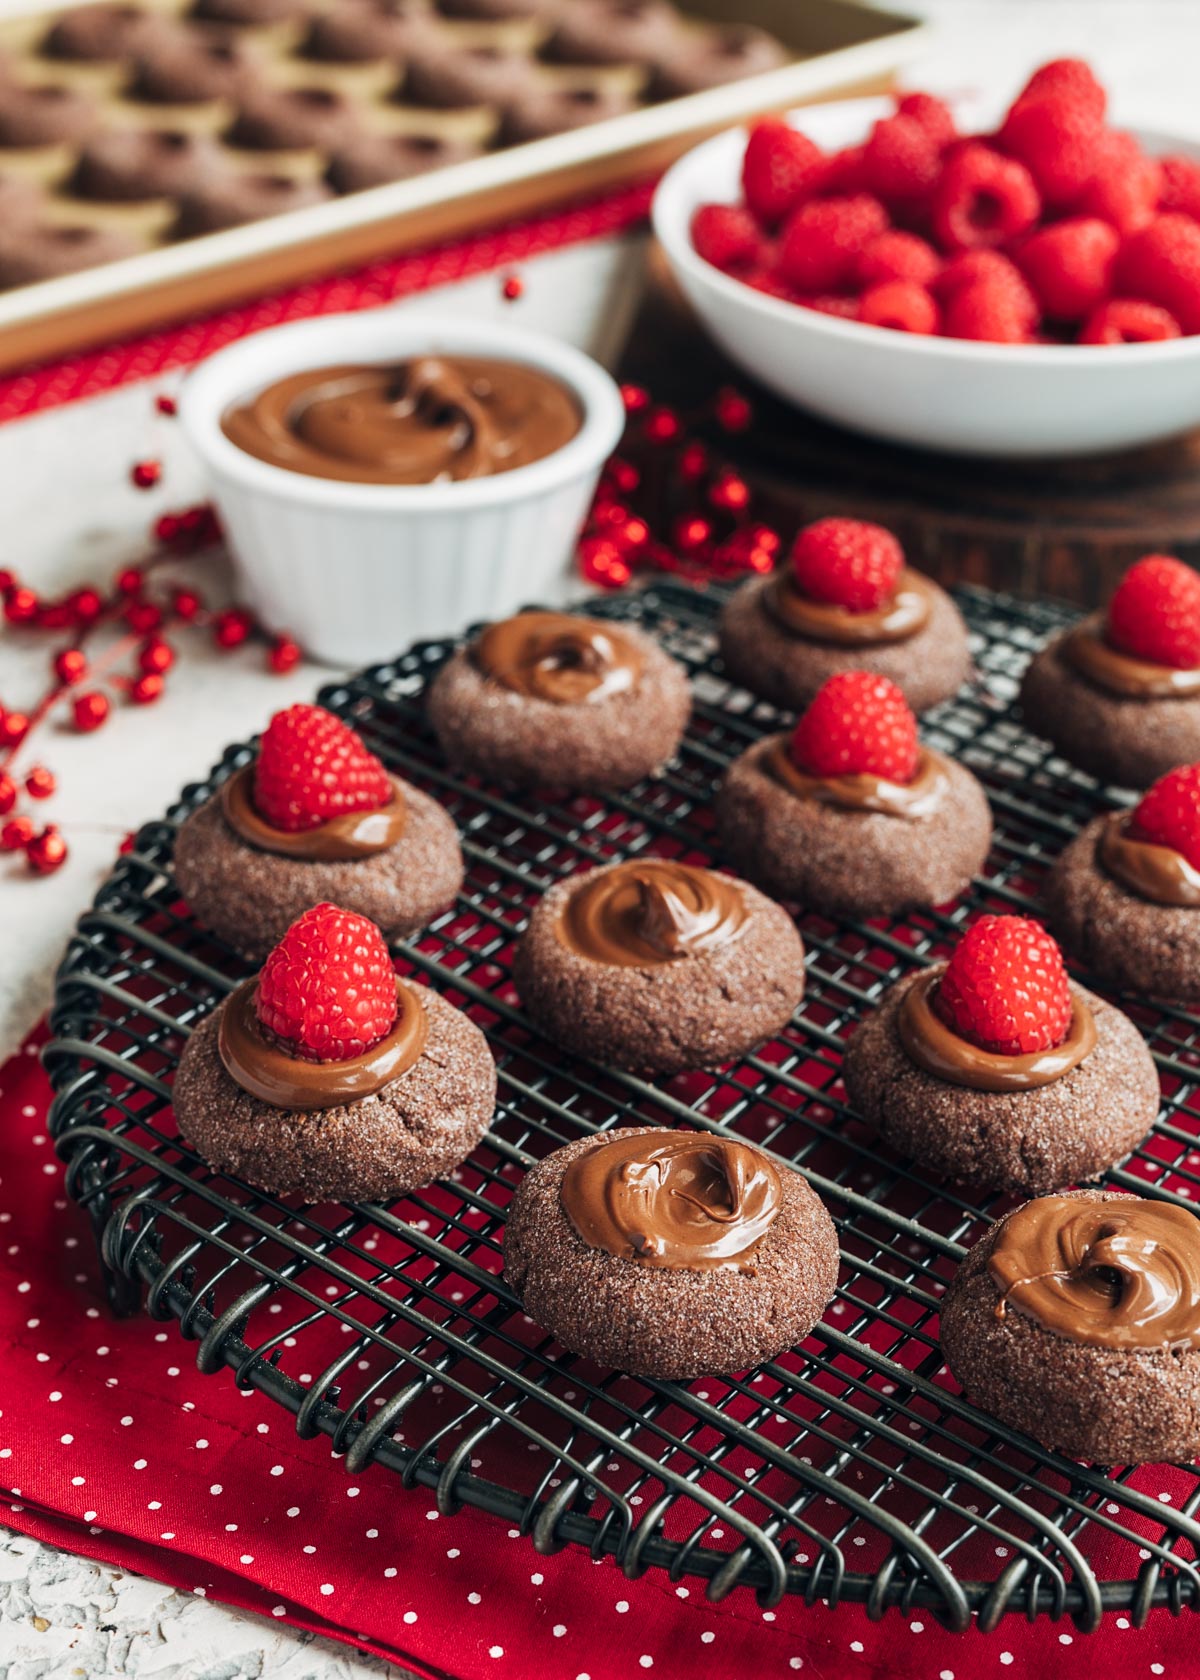 chocolate hazelnut thumbprint cookies on a black wire rack, some topped with raspberries